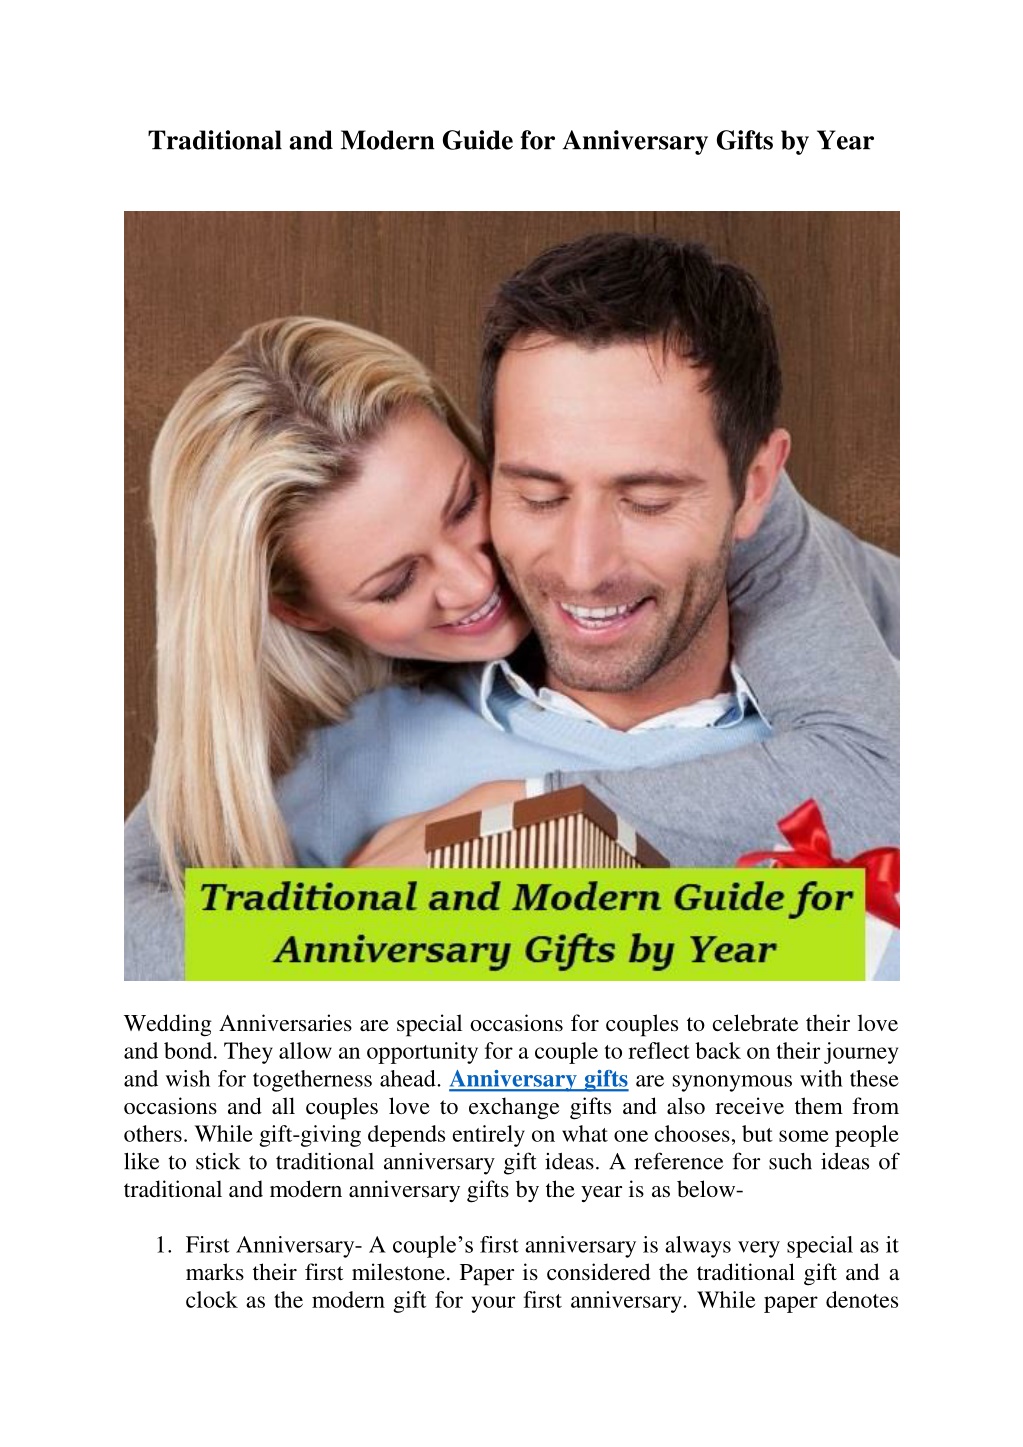 Your Guide to Traditional and Modern Wedding Anniversary Gifts